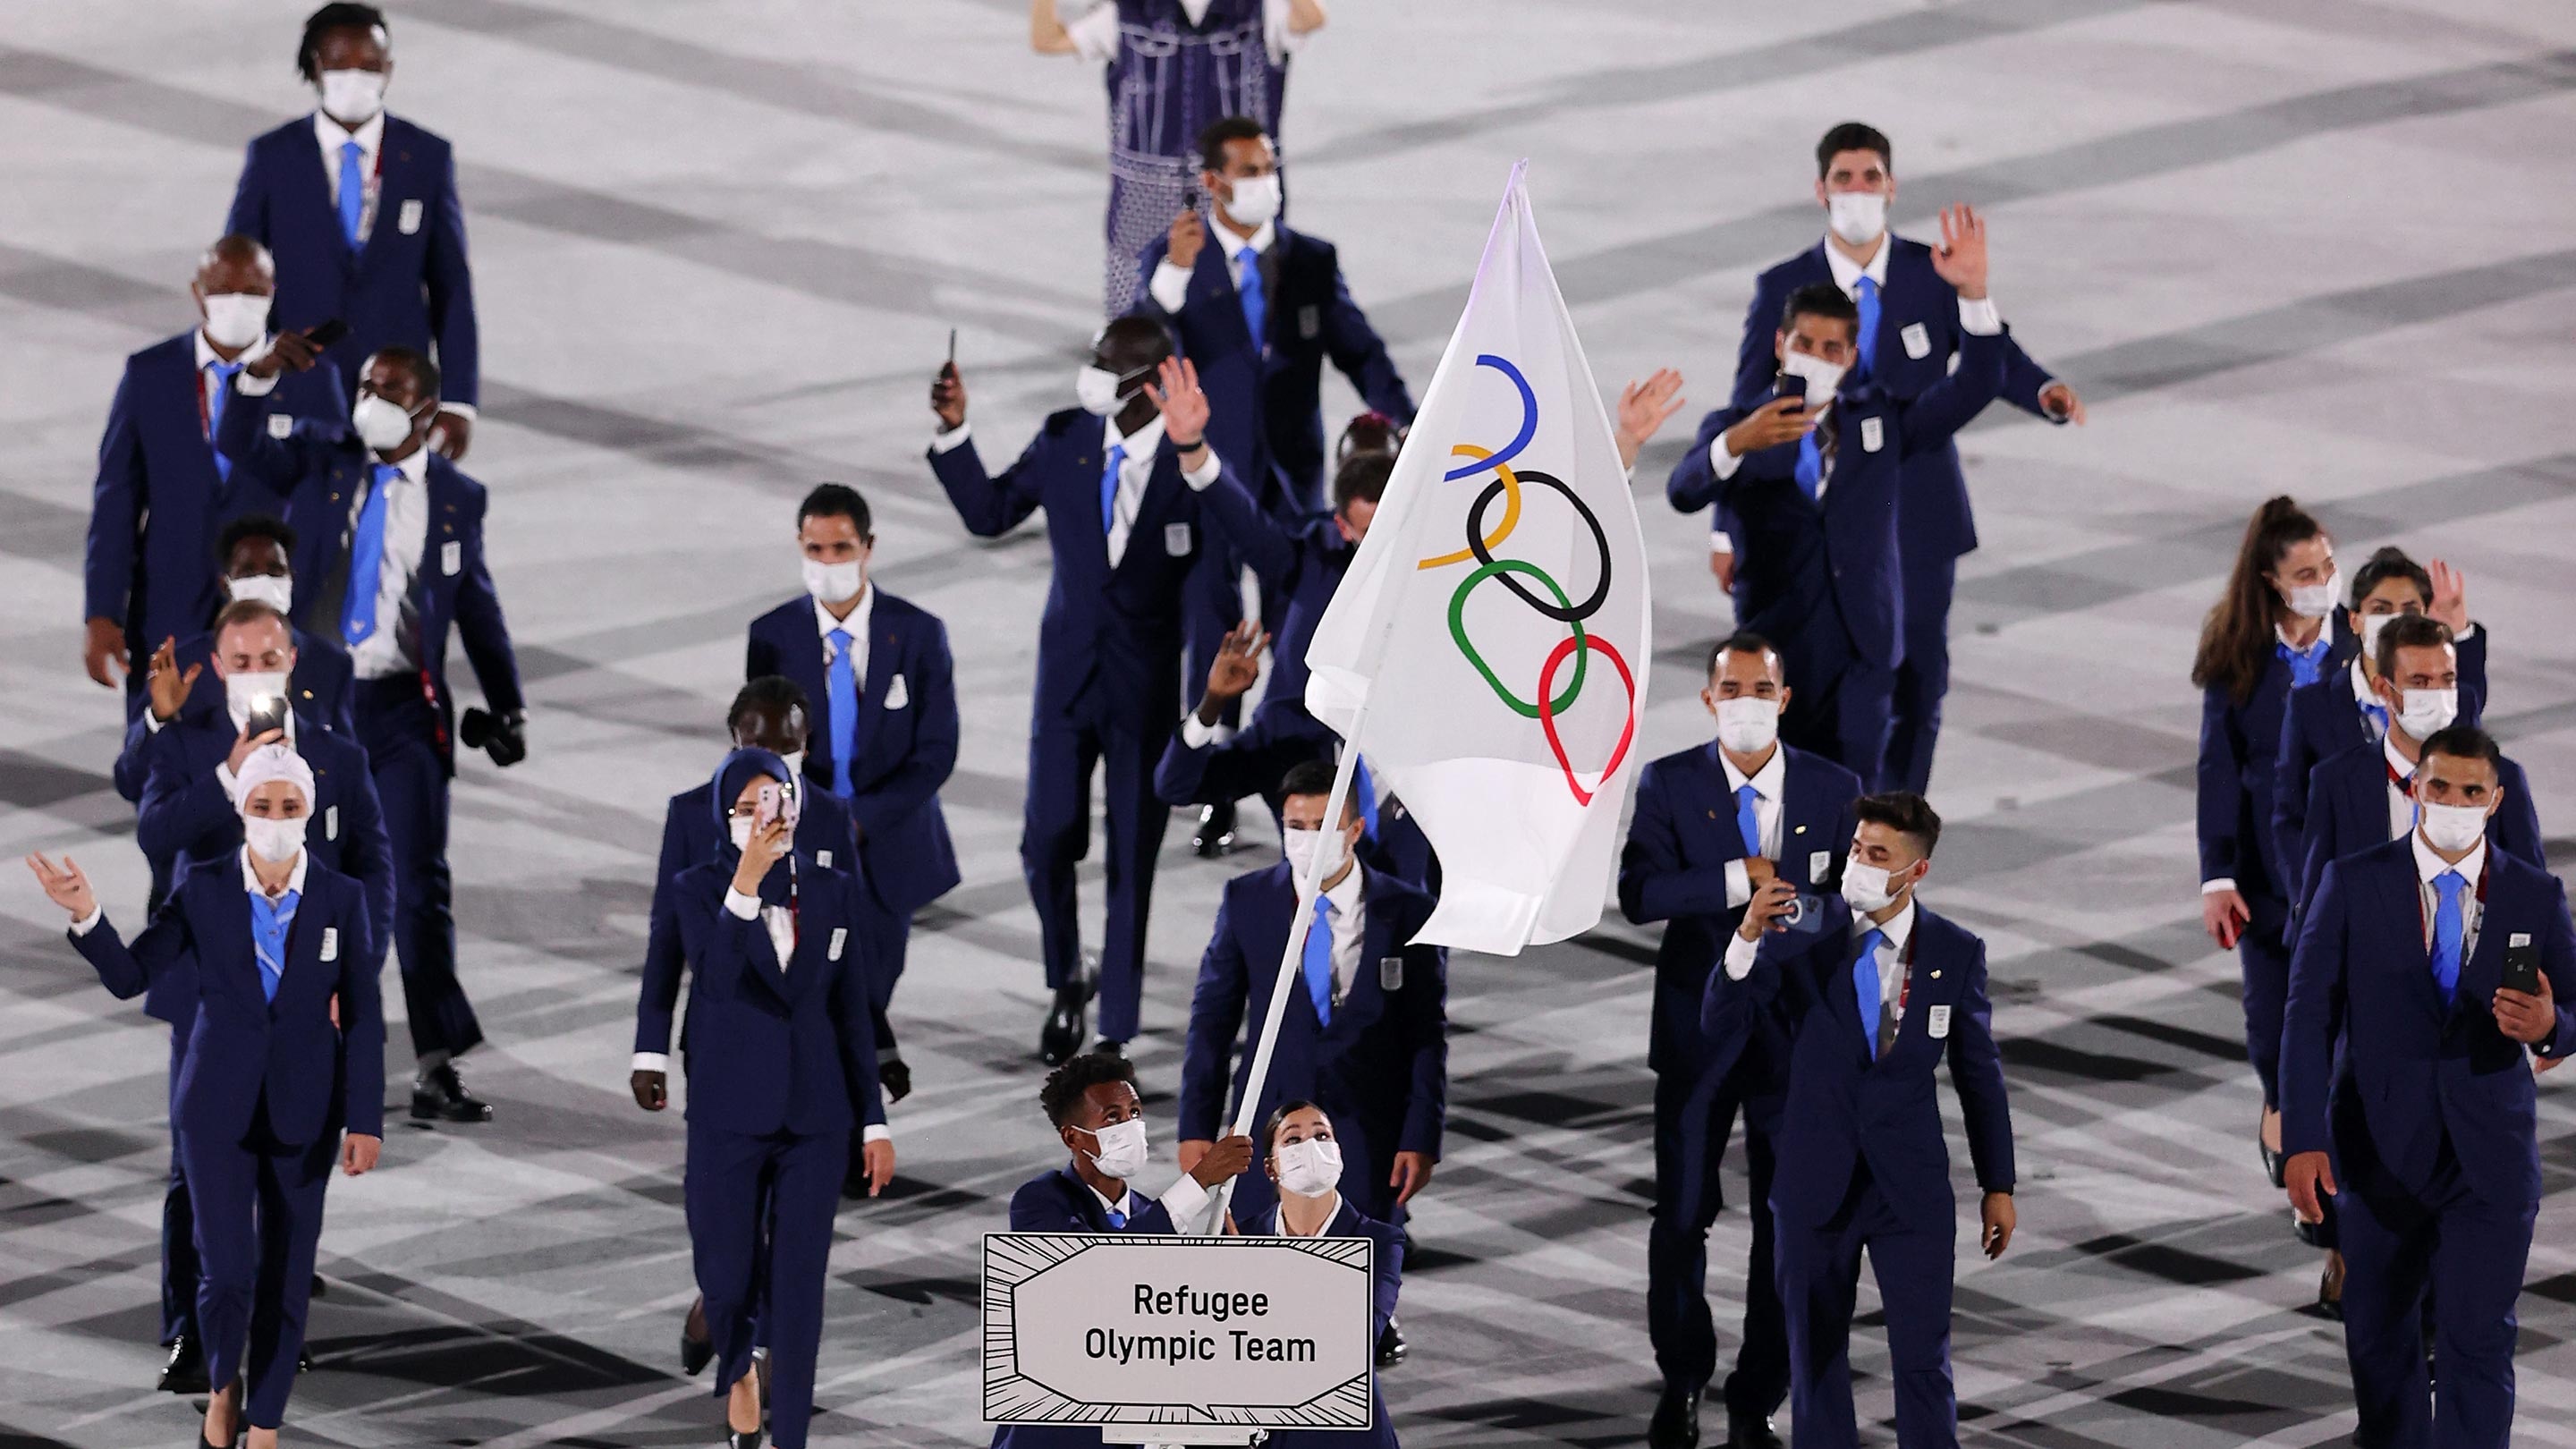 The Ioc Refugee Olympic Team A Team Powered By Solidarity Olympic News